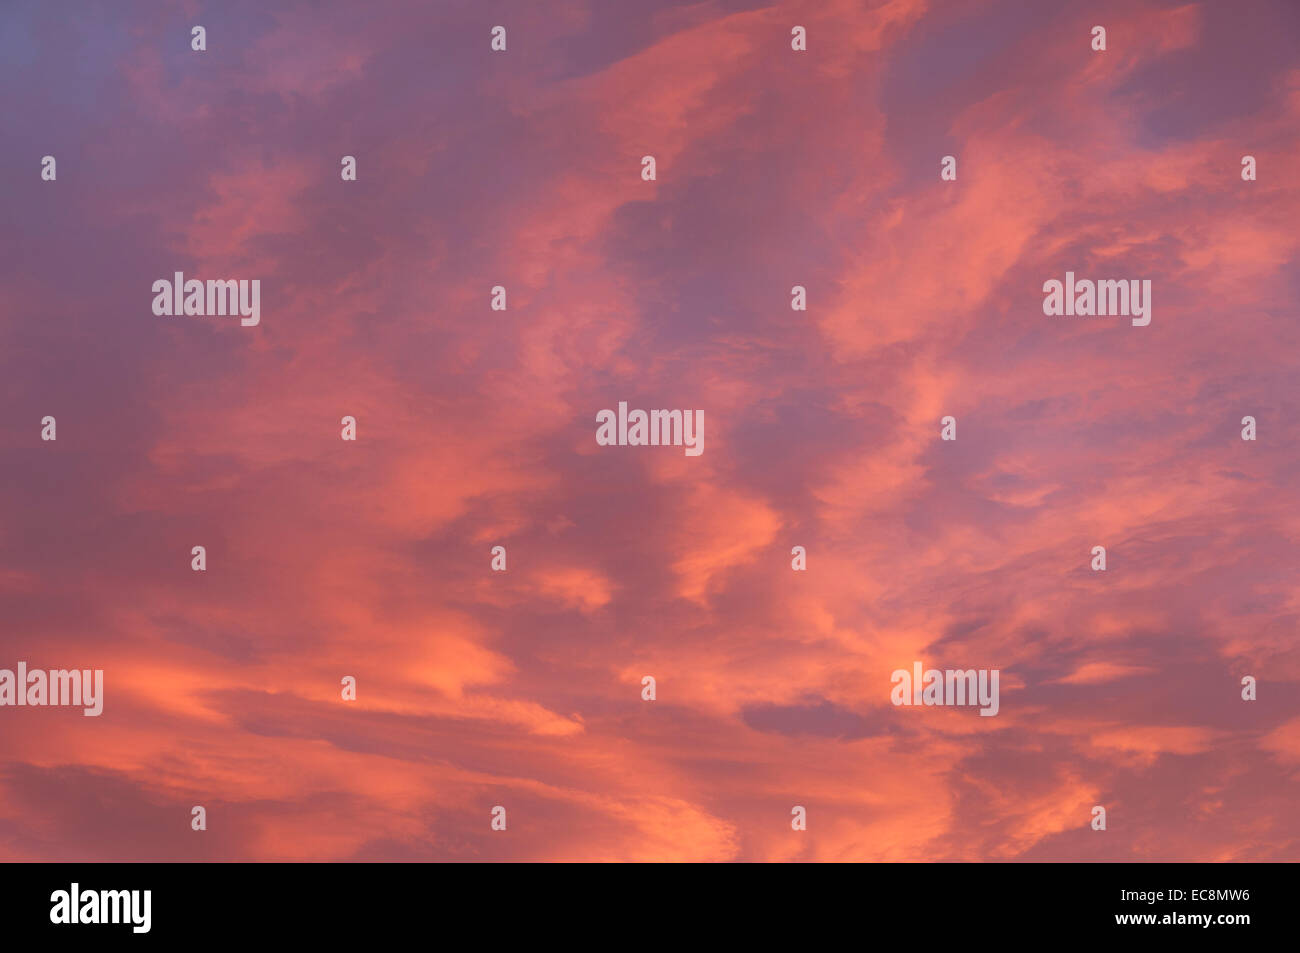 Cloudy red sky Stock Photo